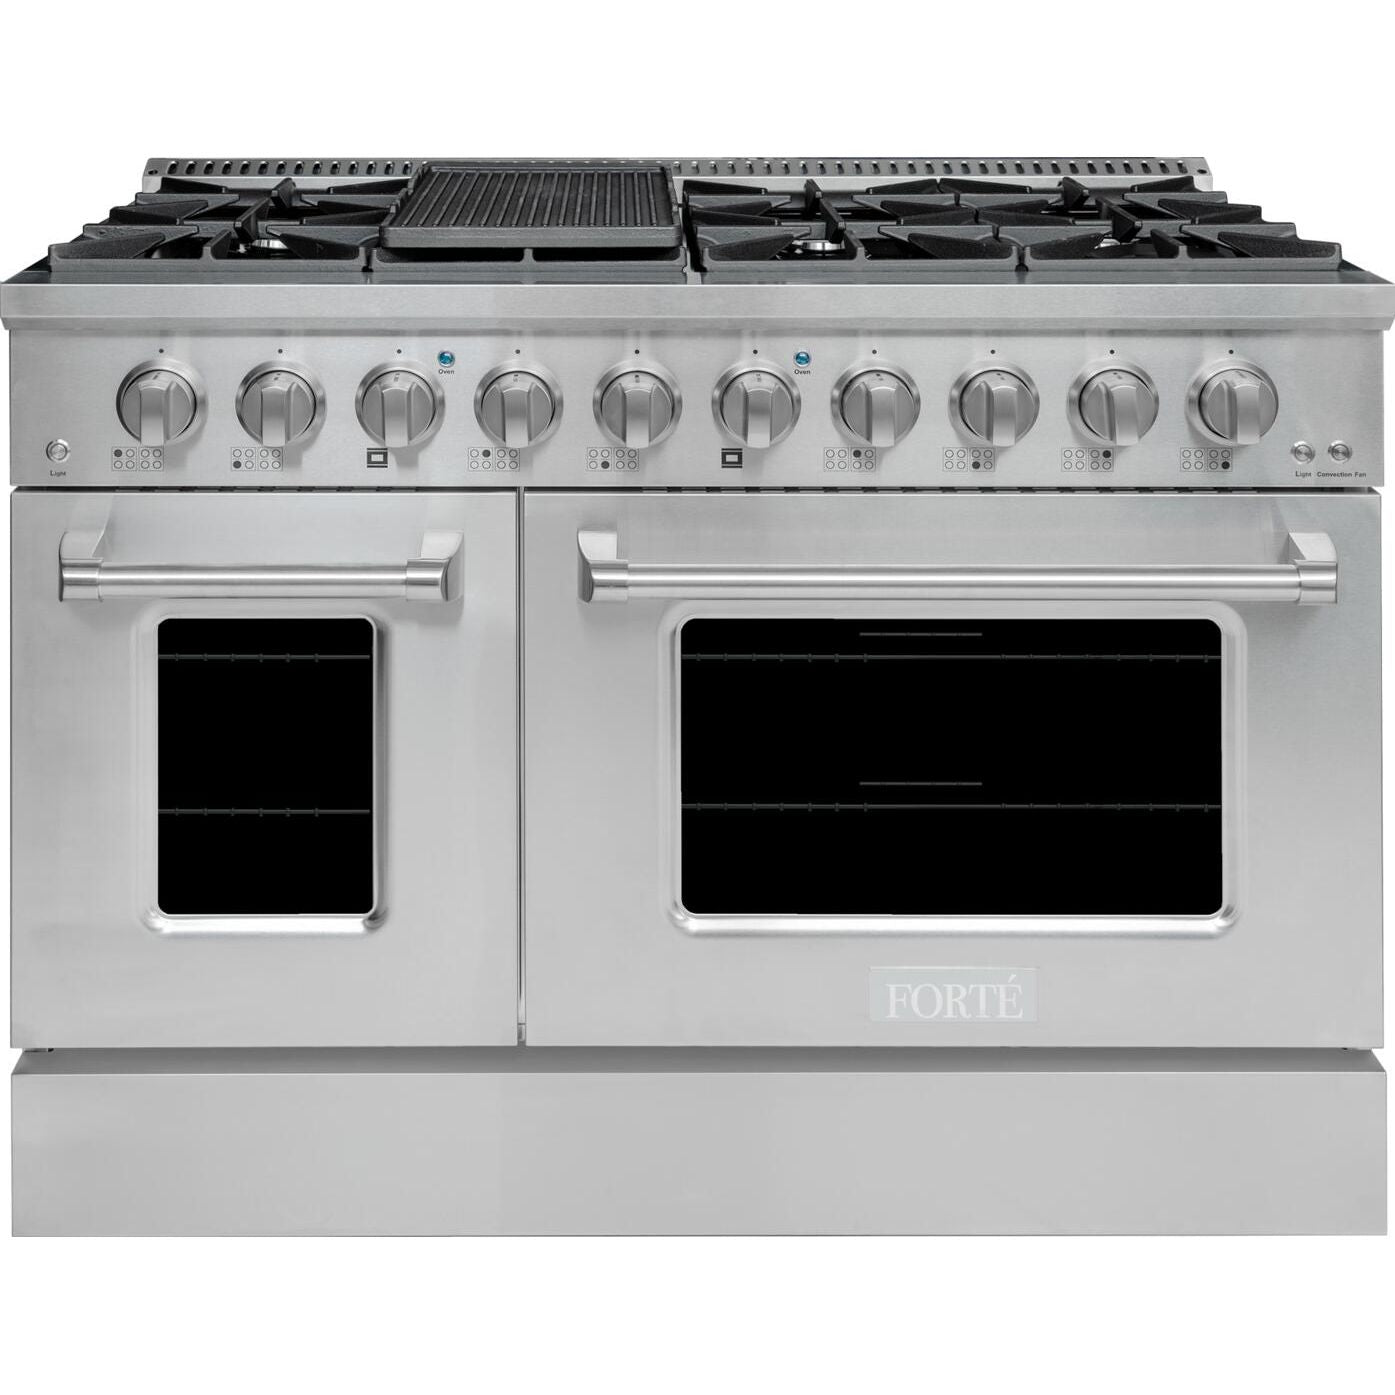 Forte 48" Freestanding All Gas Range - 8 Sealed Italian Made Burners, 5.53 cu. ft. Oven & Griddle - in Stainless Steel (FGR488BSS) - New Star Living